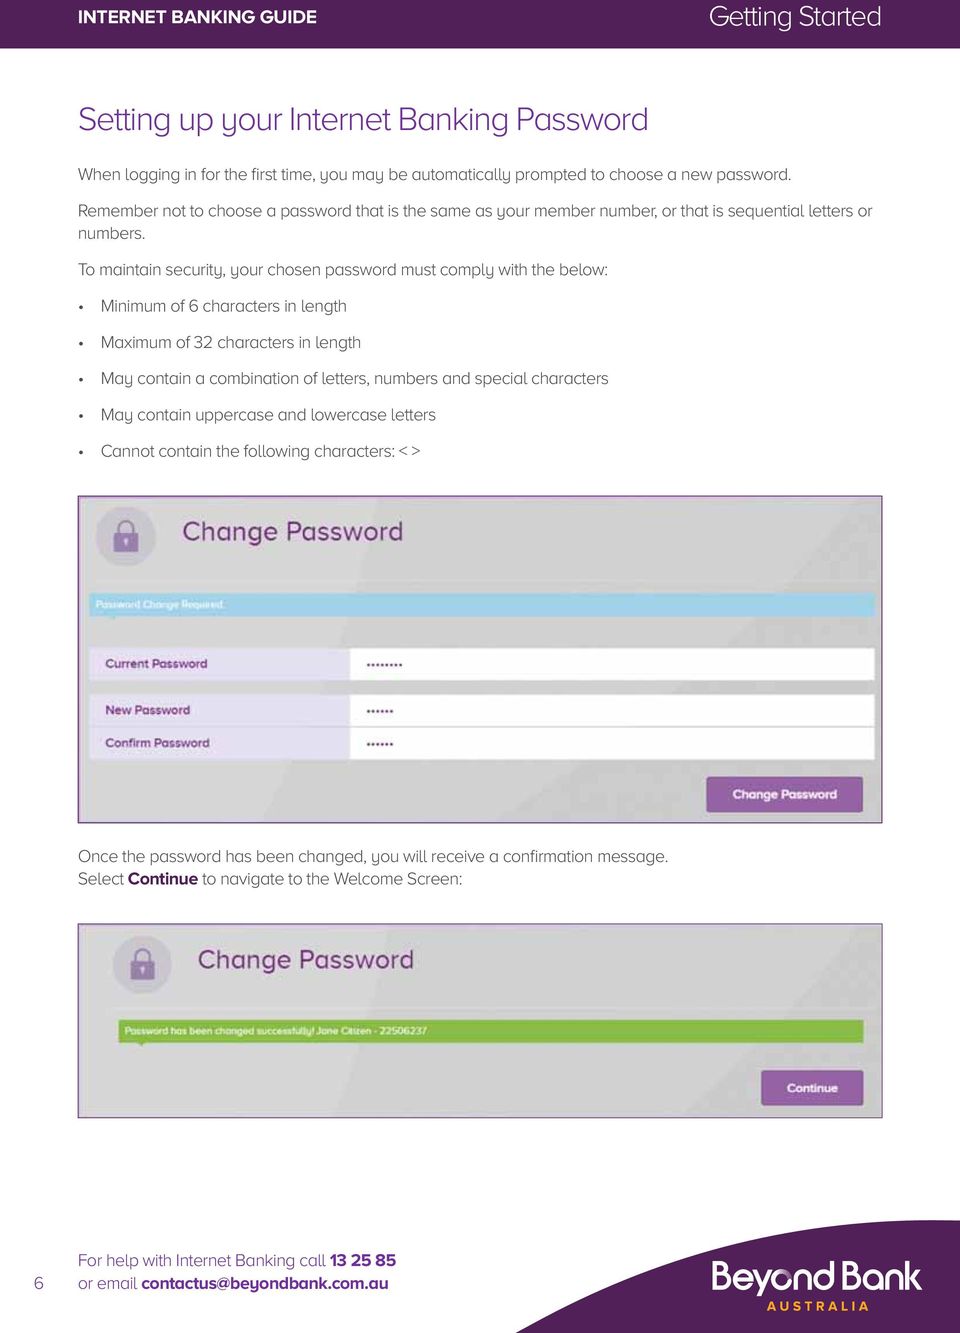 To maintain security, your chosen password must comply with the below: Minimum of 6 characters in length Maximum of 32 characters in length May contain a combination of